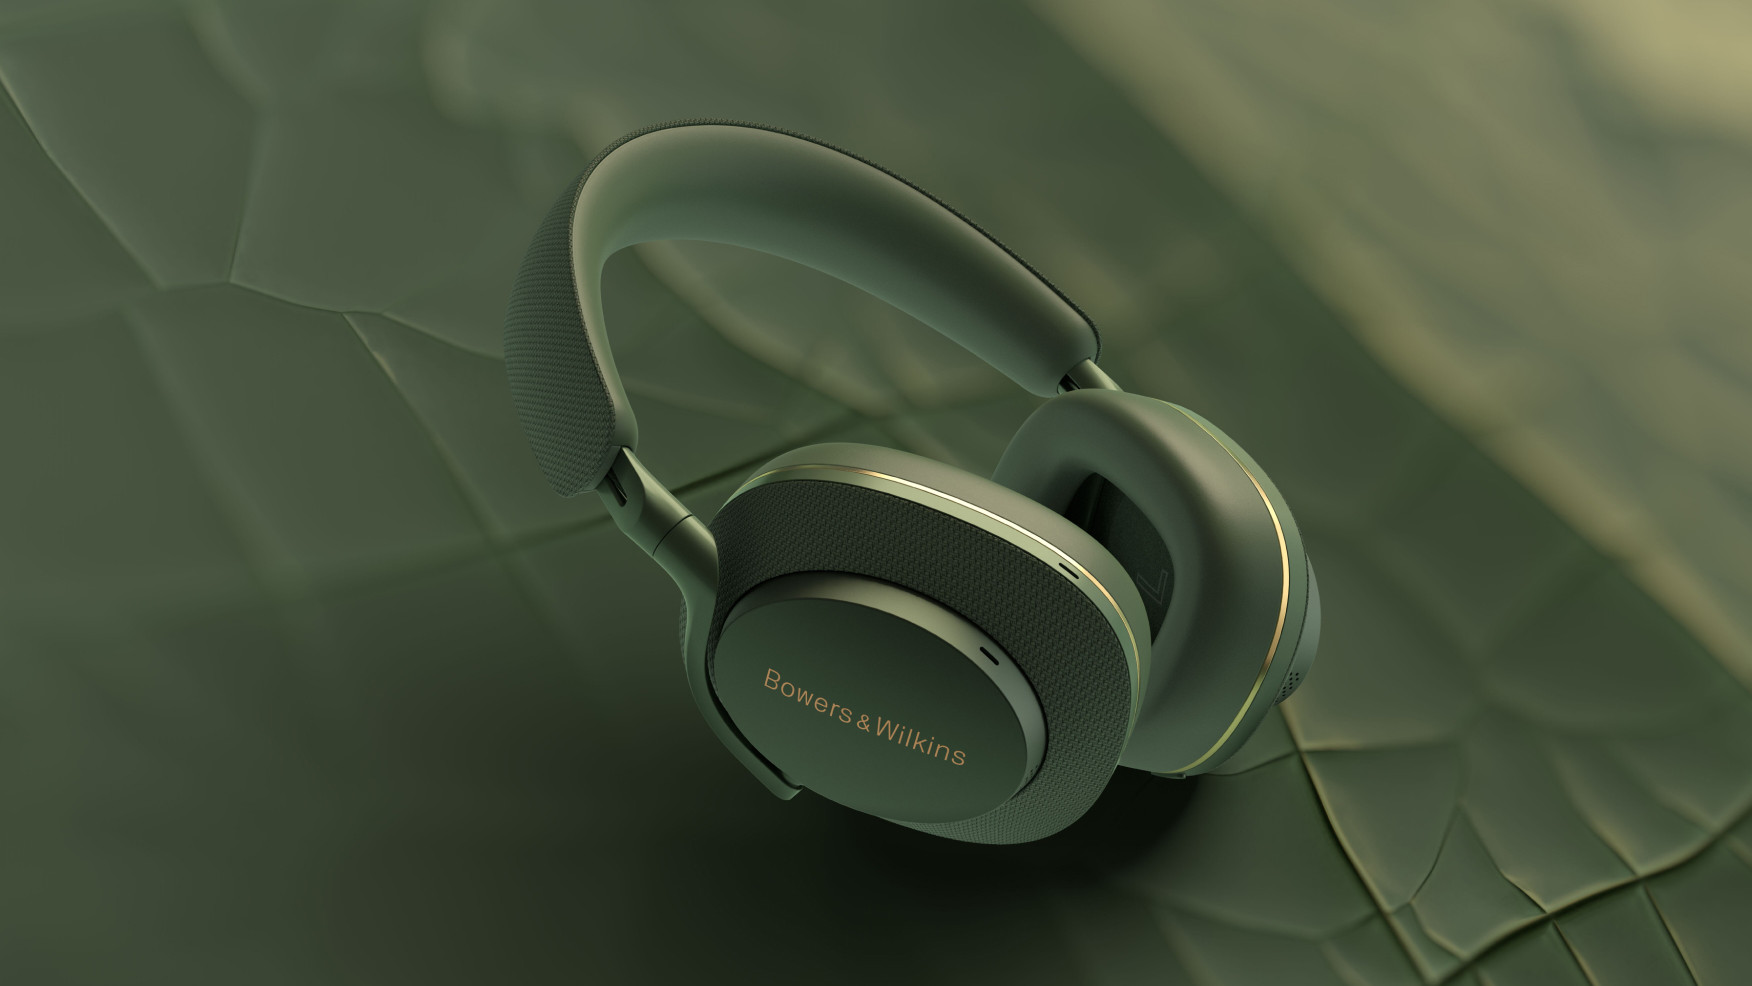 Bowers & Wilkins launches Px7 S2e headphones, but what's new?